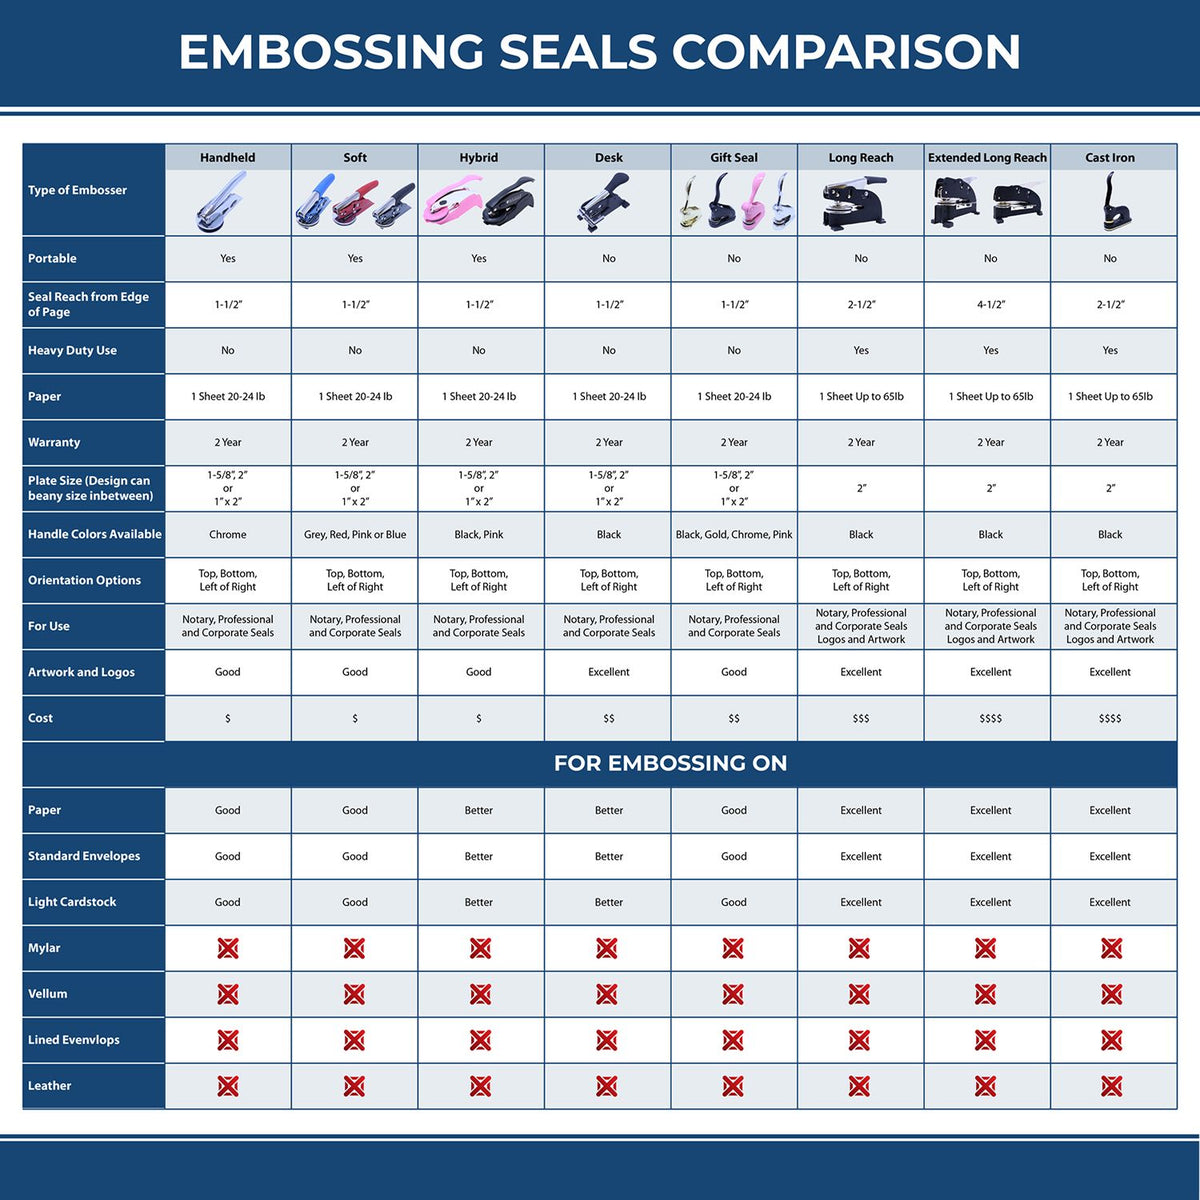 A comparison chart for the different types of mount models available for the Extended Long Reach Montana Surveyor Embosser.